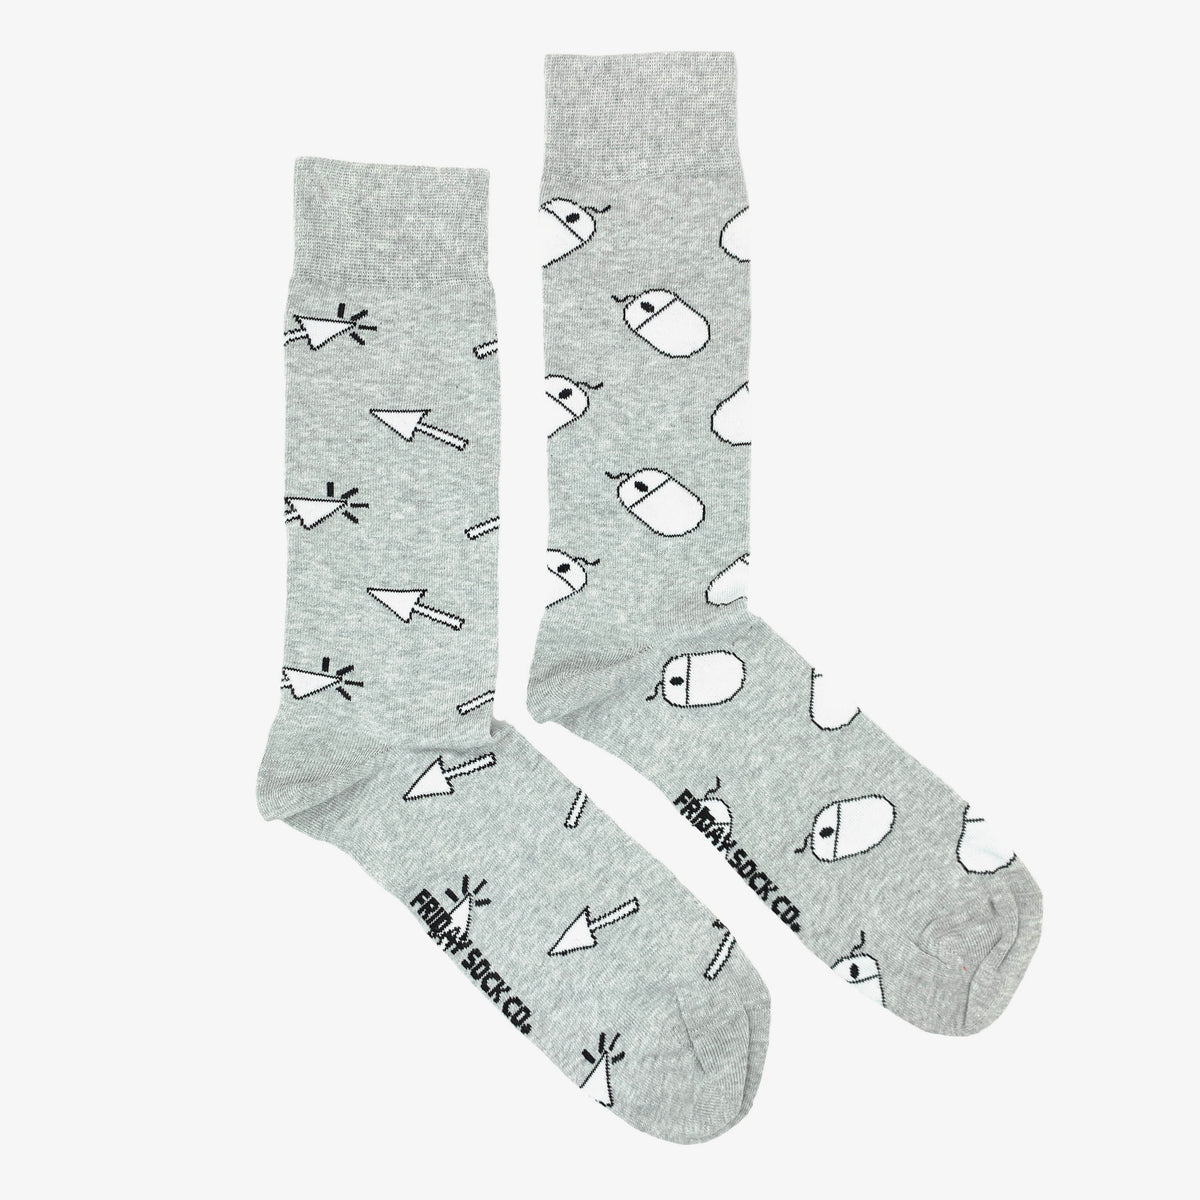 Purposely Mismatched Socks | GiftSuite — Modern Corporate Gifts – GiftSuite